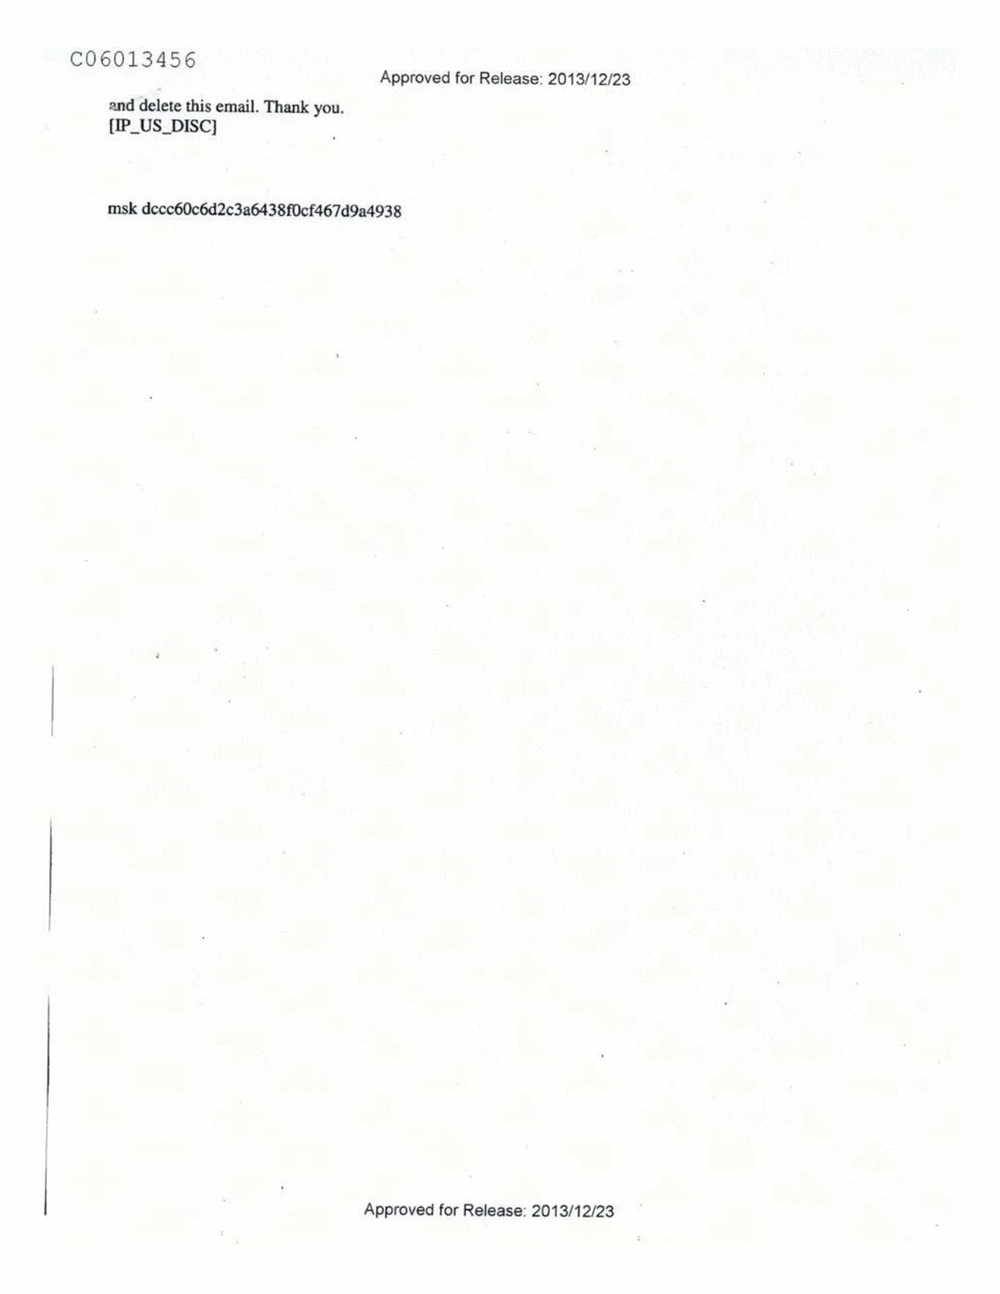 Page 324 from Email Correspondence Between Reporters and CIA Flacks